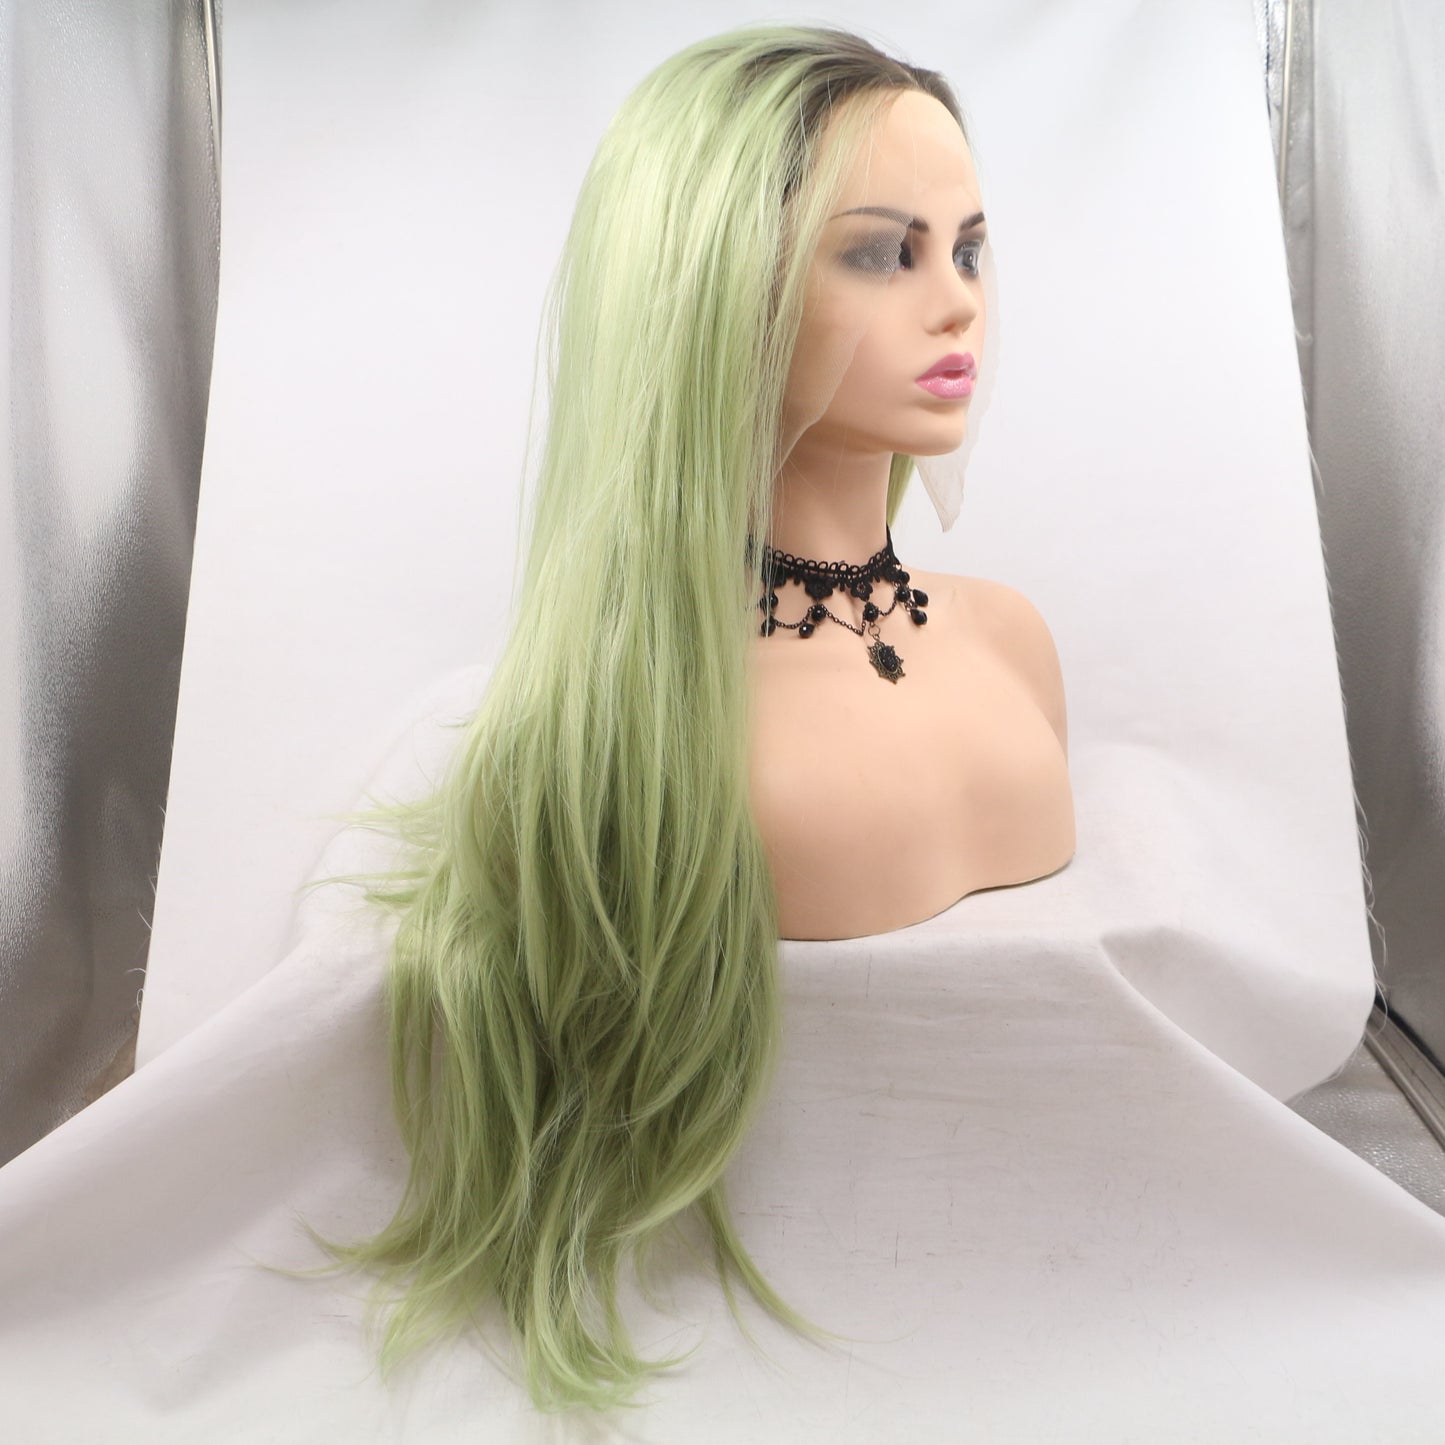 Green Lace Front Synthetic Wig for Women Long Wavy Fashion Wigs for Party Costume